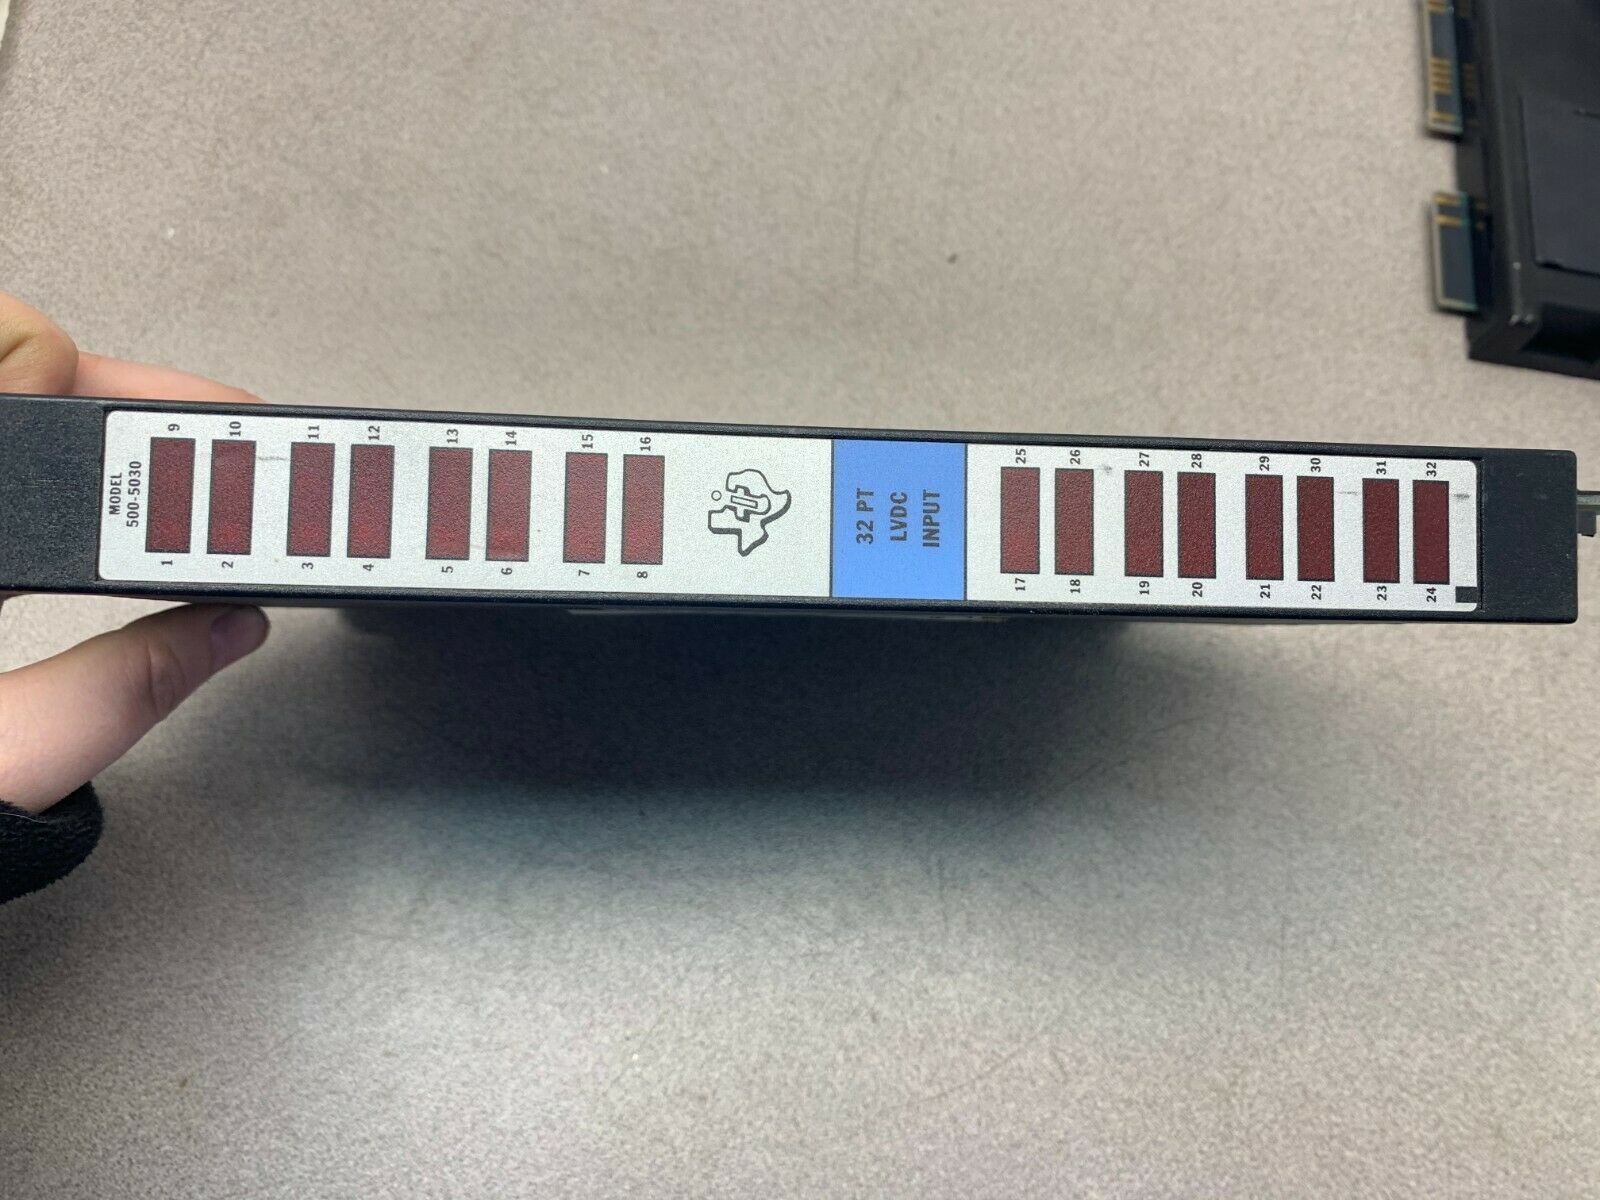 USED TEXAS INSTRUMENTS INPUT MODULE 500-5030